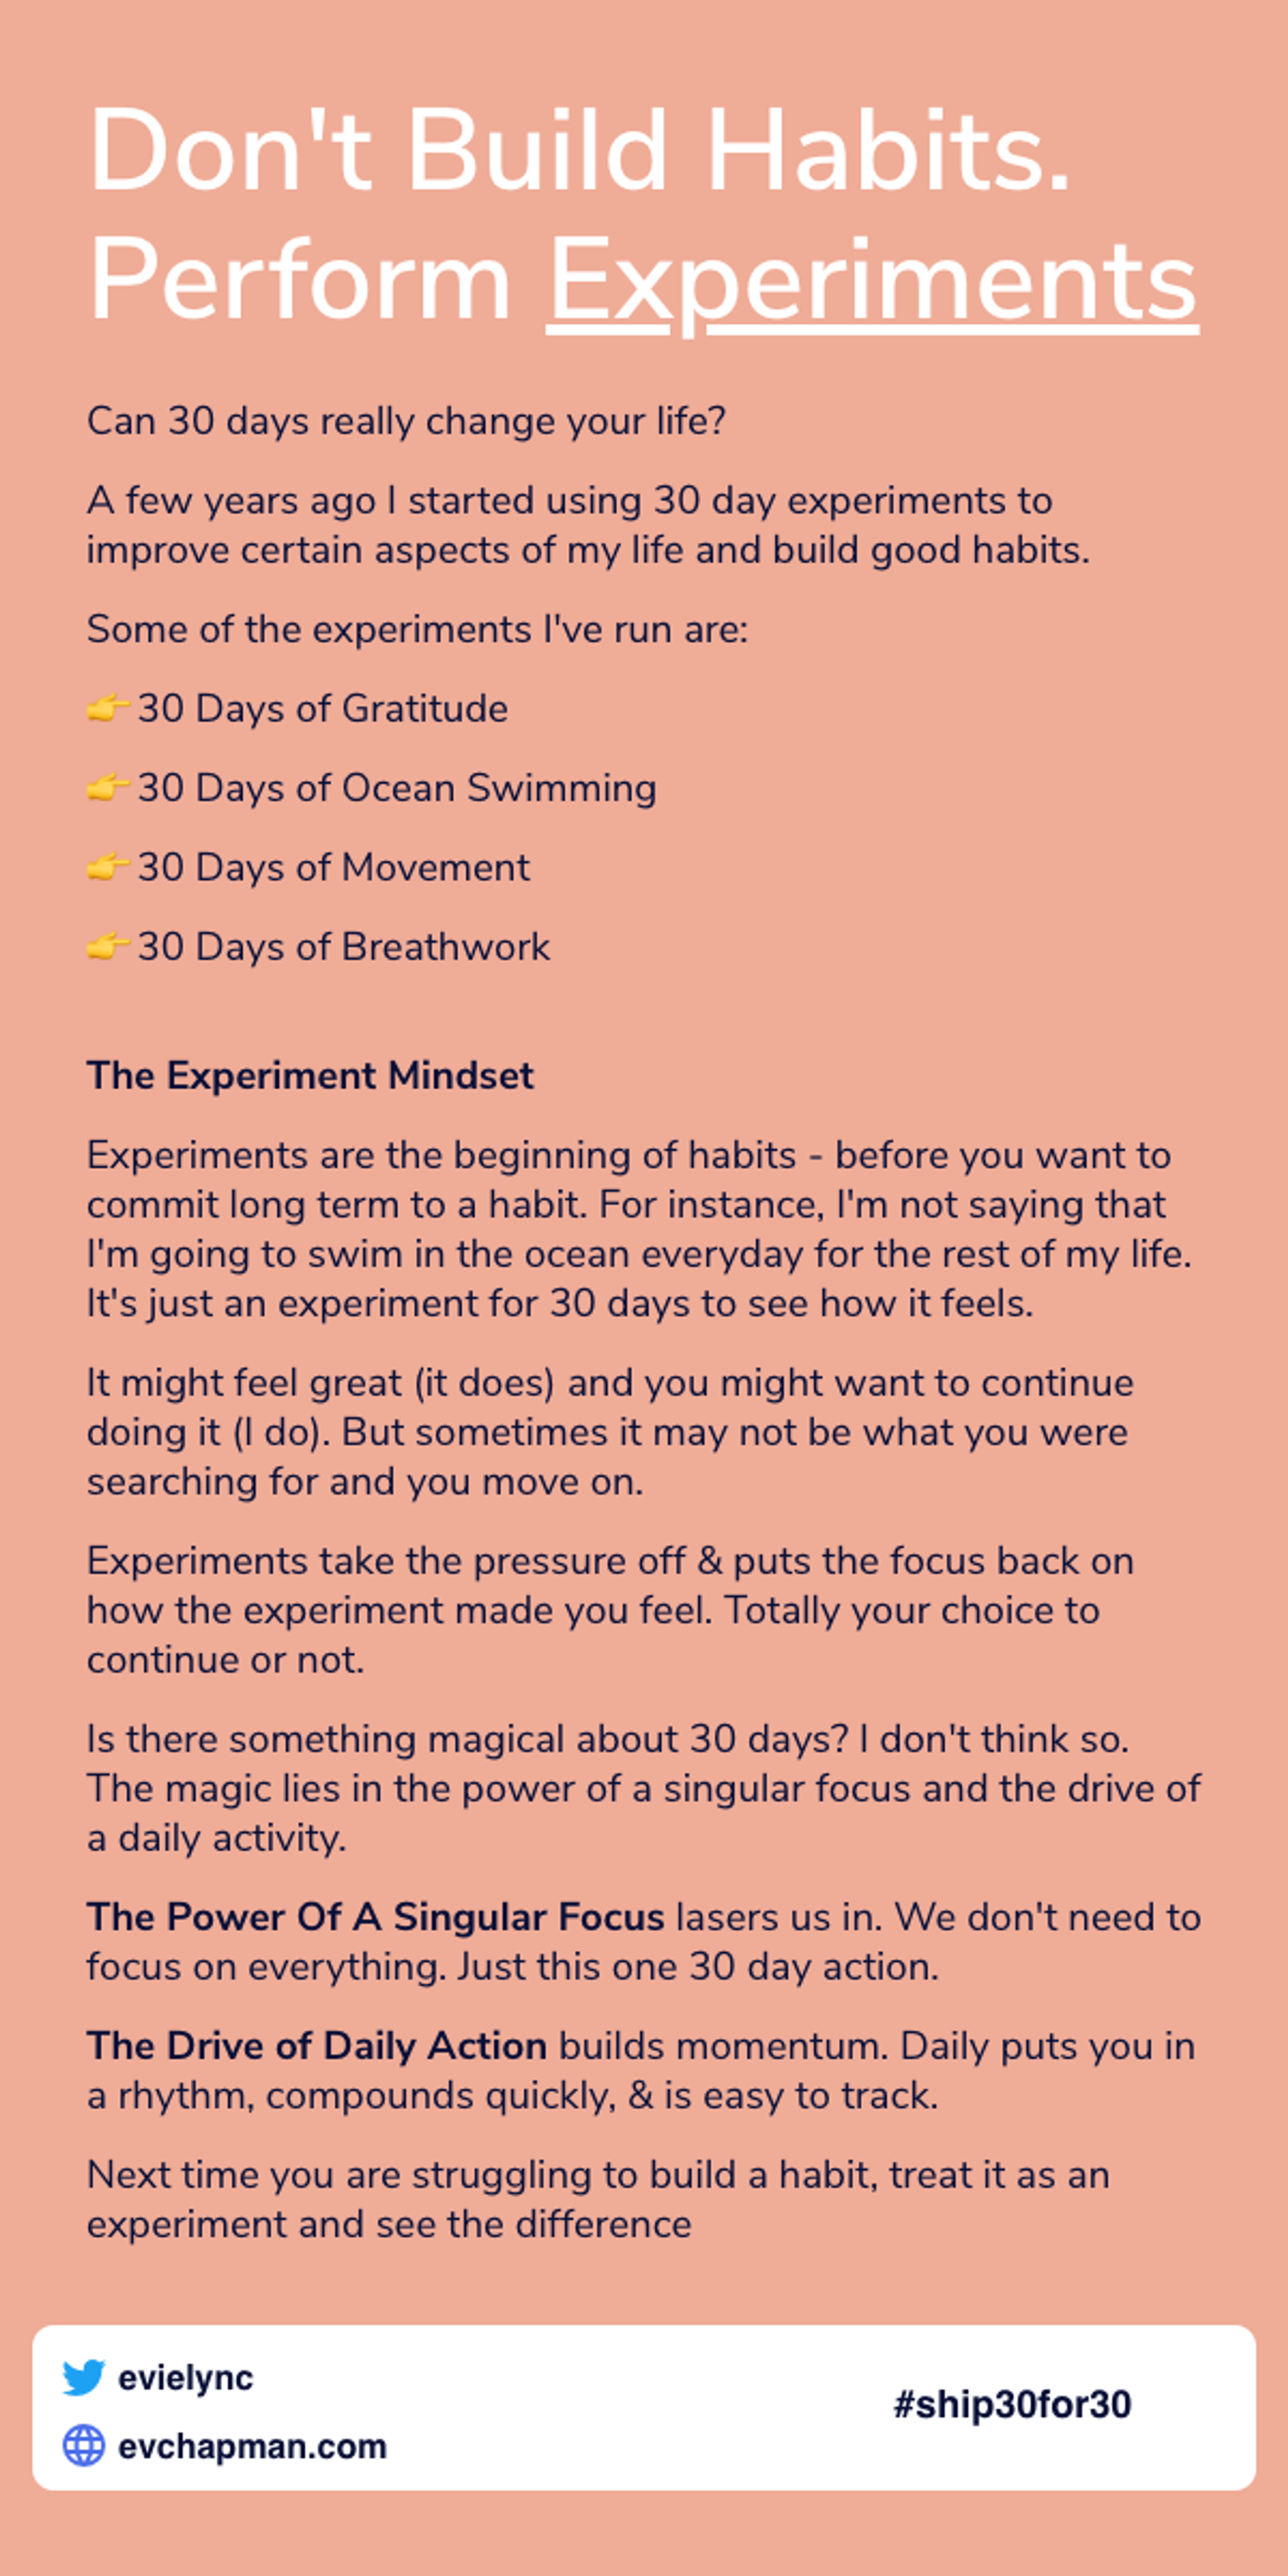 Day 3: Don't Build Habits. Perform Experiments